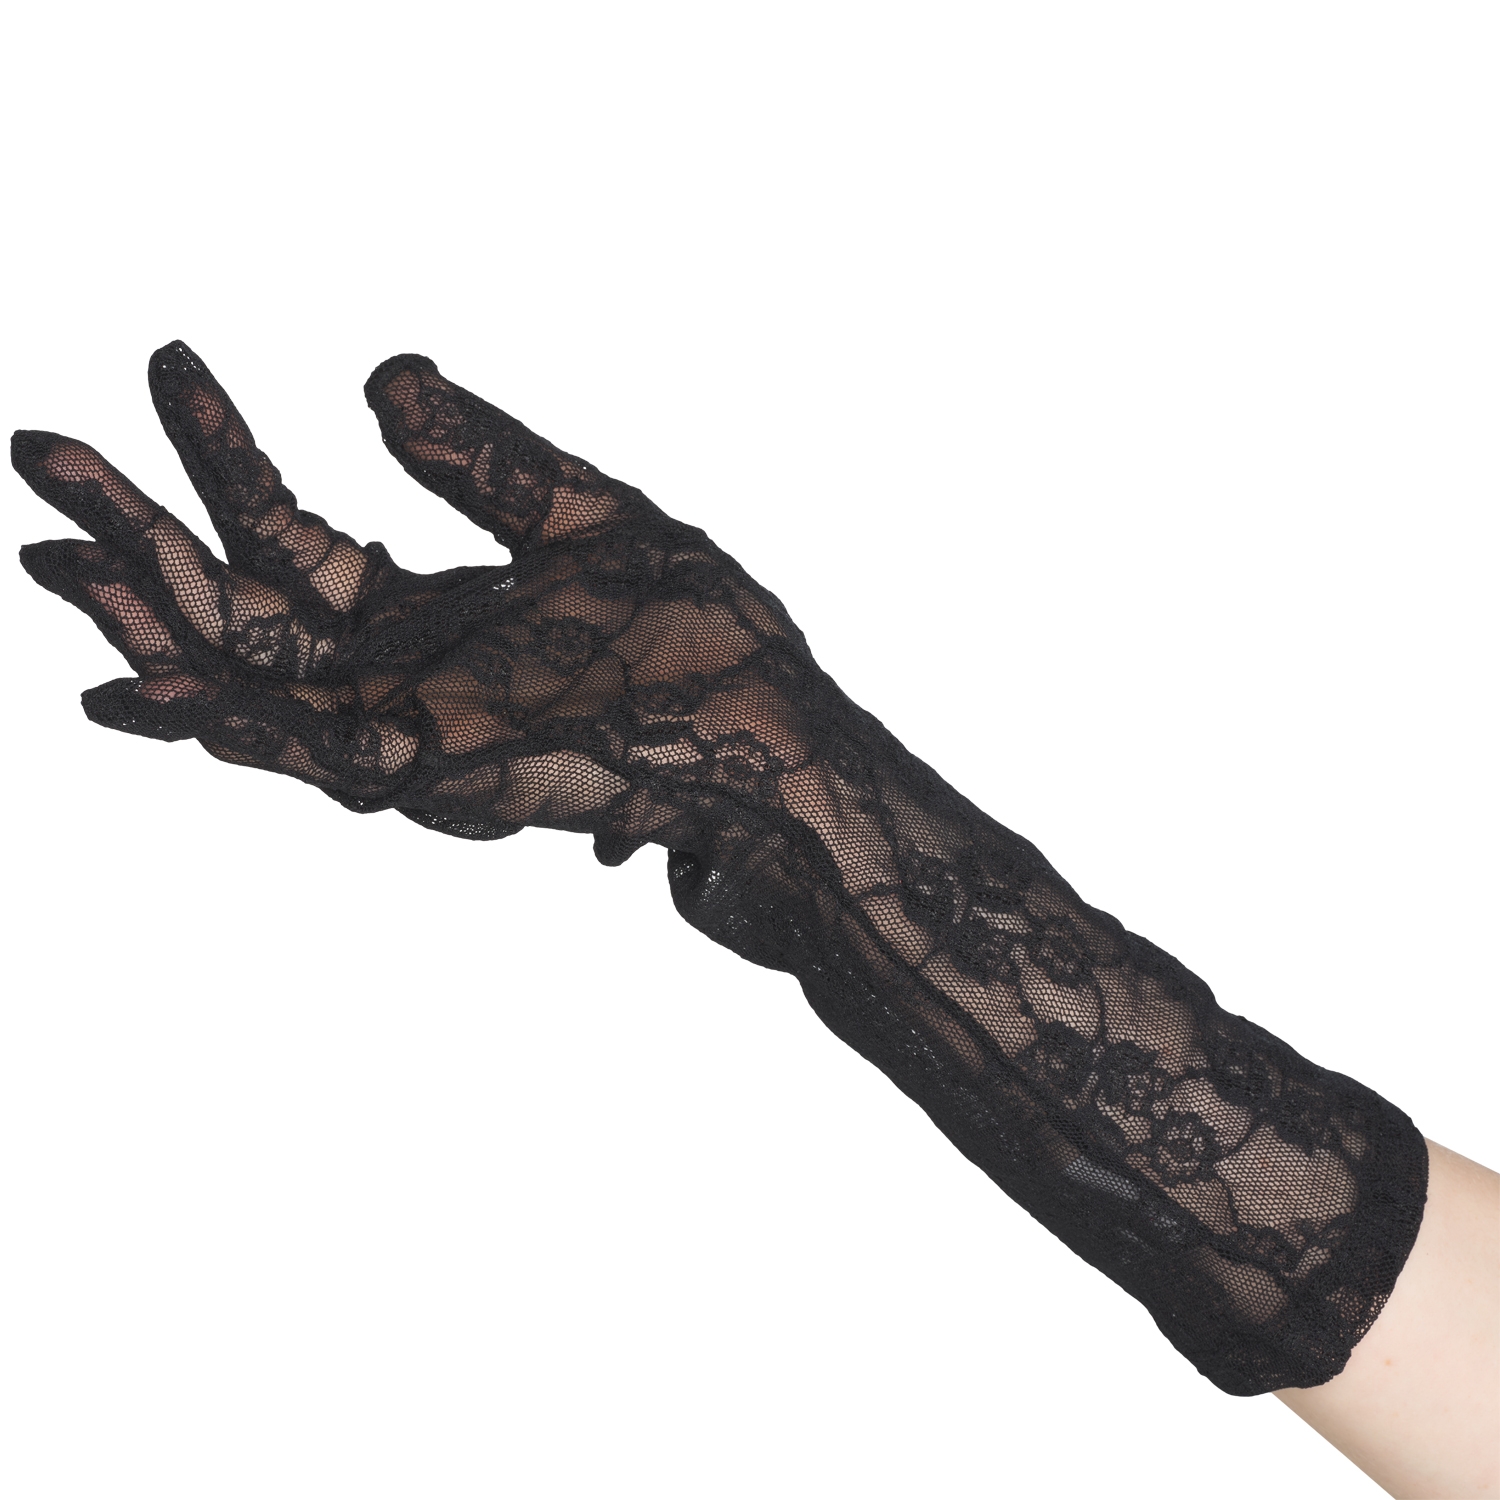 Amorable by Rimba Blonde Handsker One-Size - Black - One Size thumbnail